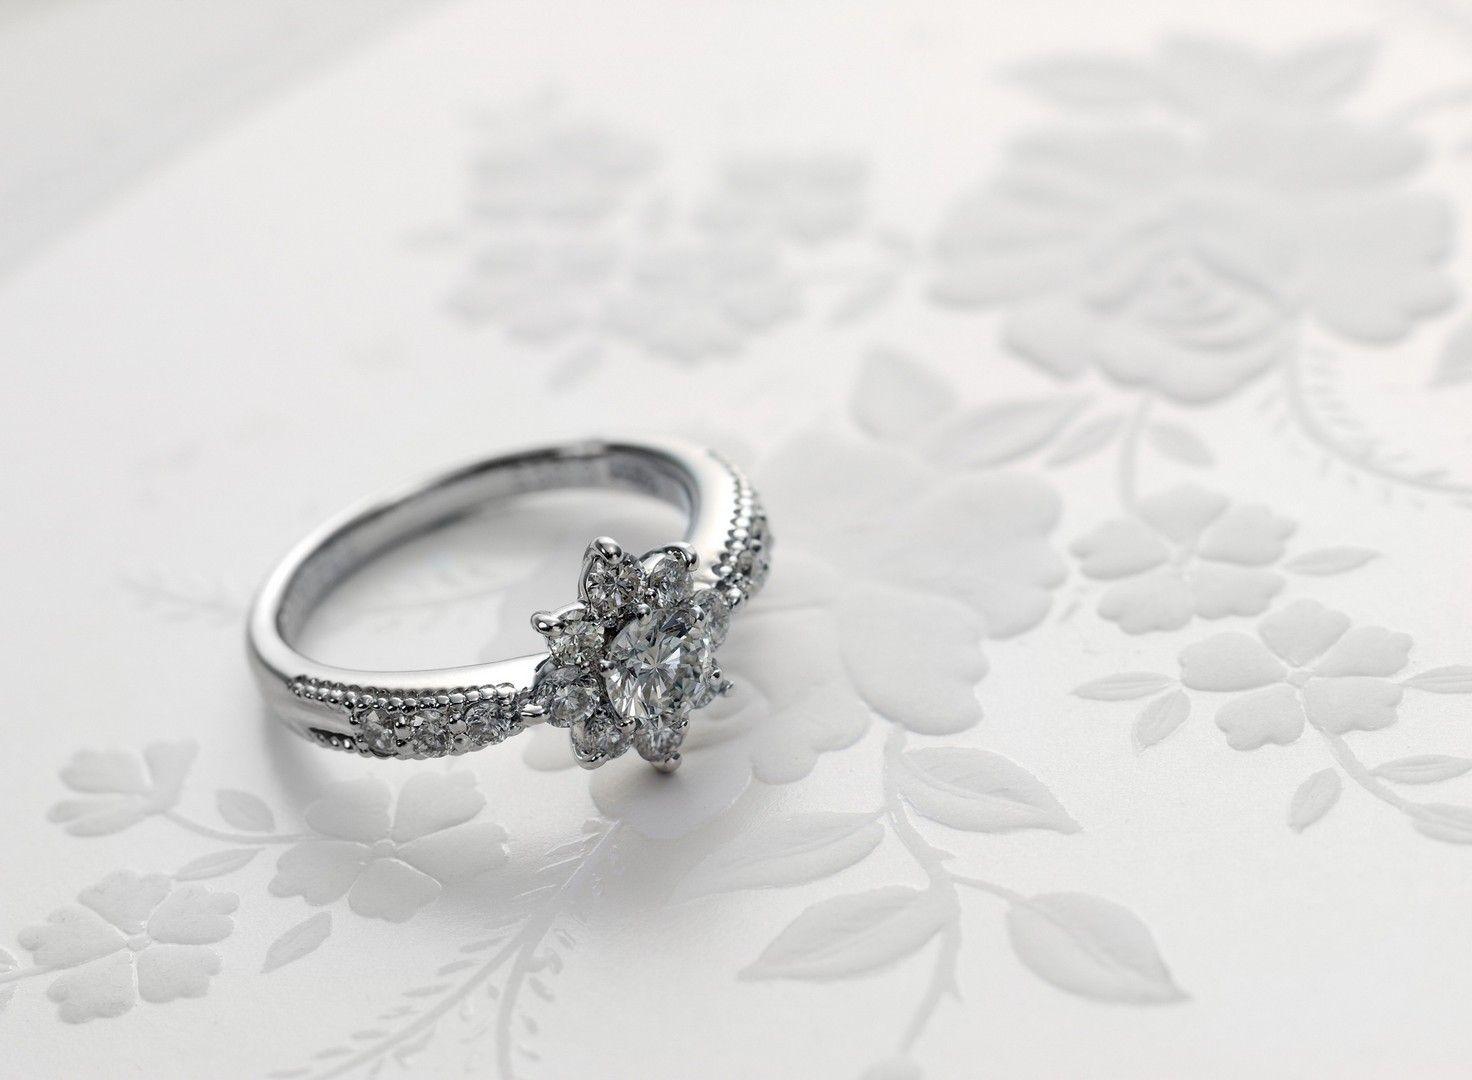 Ring Photos, Download The BEST Free Ring Stock Photos & HD Images